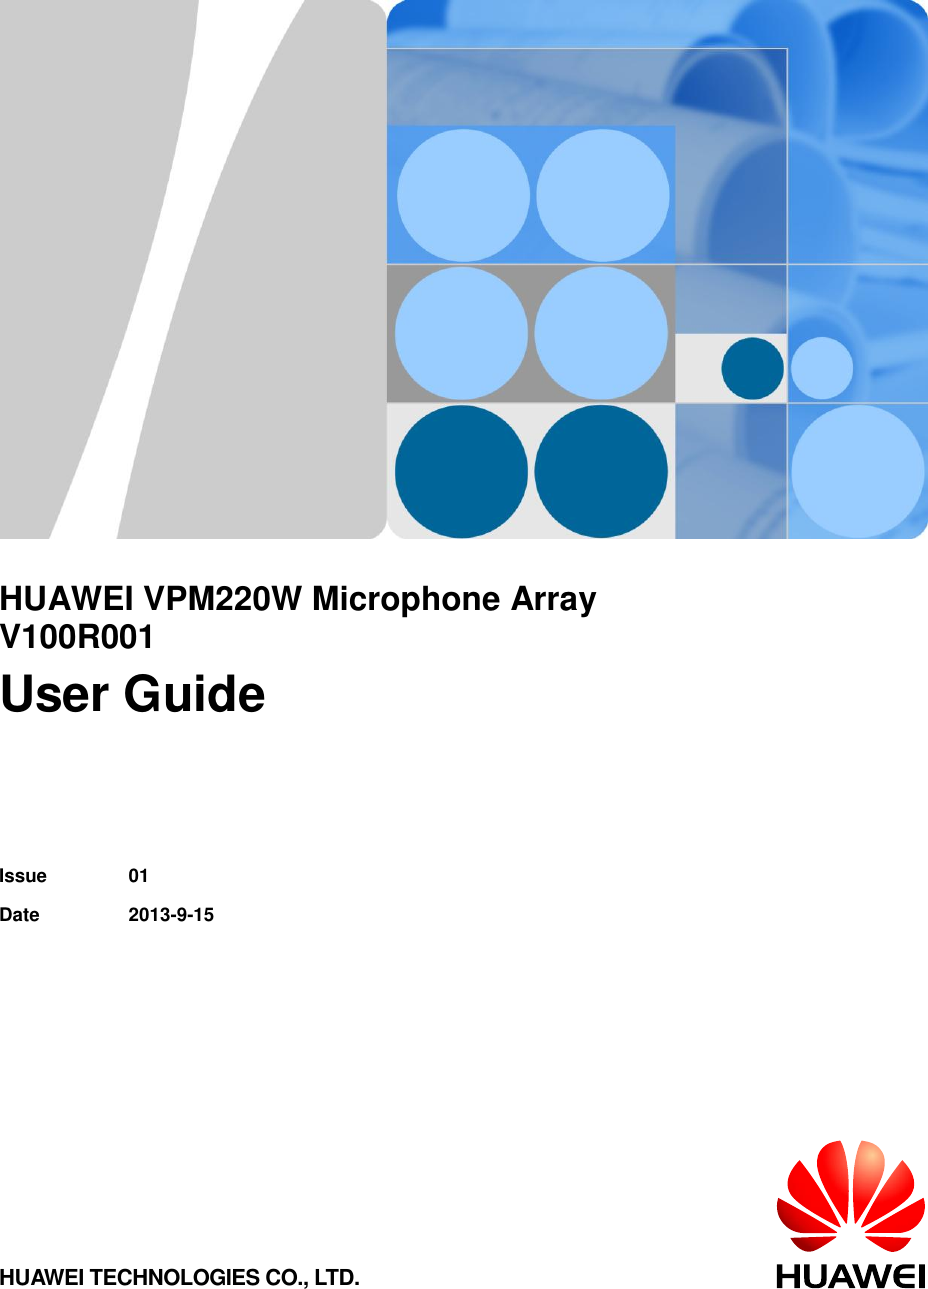         HUAWEI VPM220W Microphone Array V100R001 User Guide   Issue 01 Date 2013-9-15 HUAWEI TECHNOLOGIES CO., LTD. 